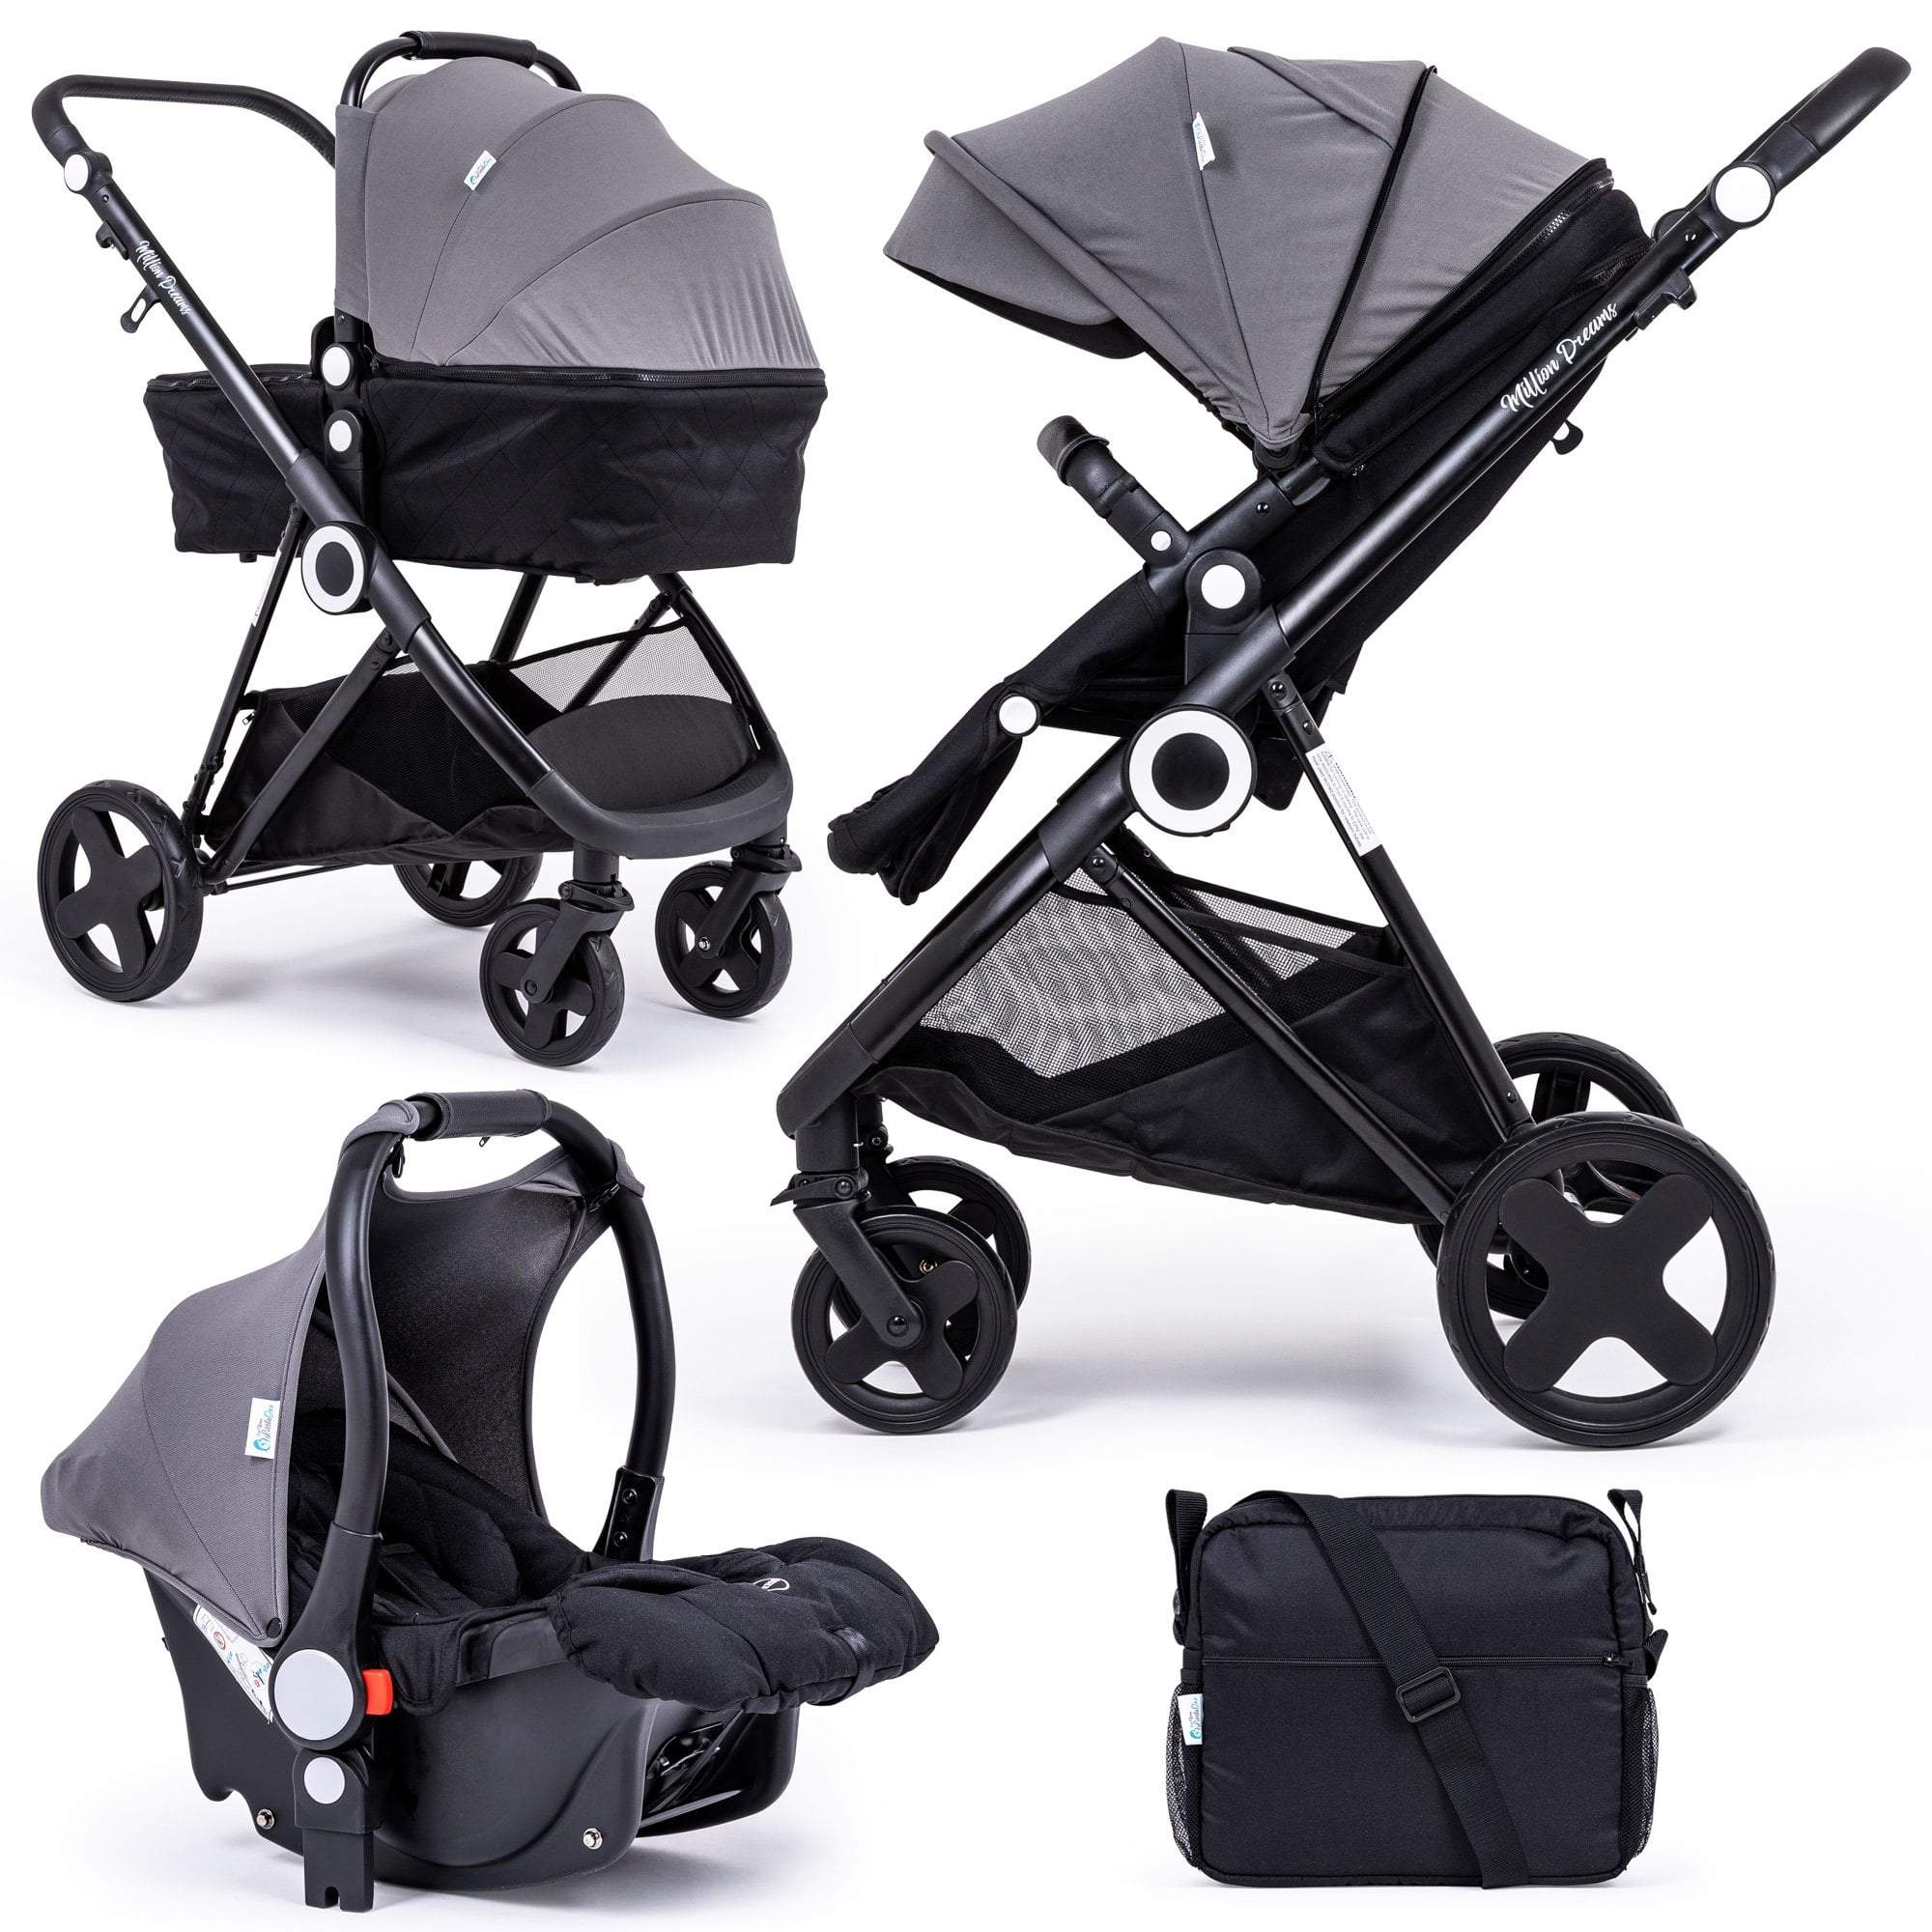 The best pushchair for toddlers in 2022